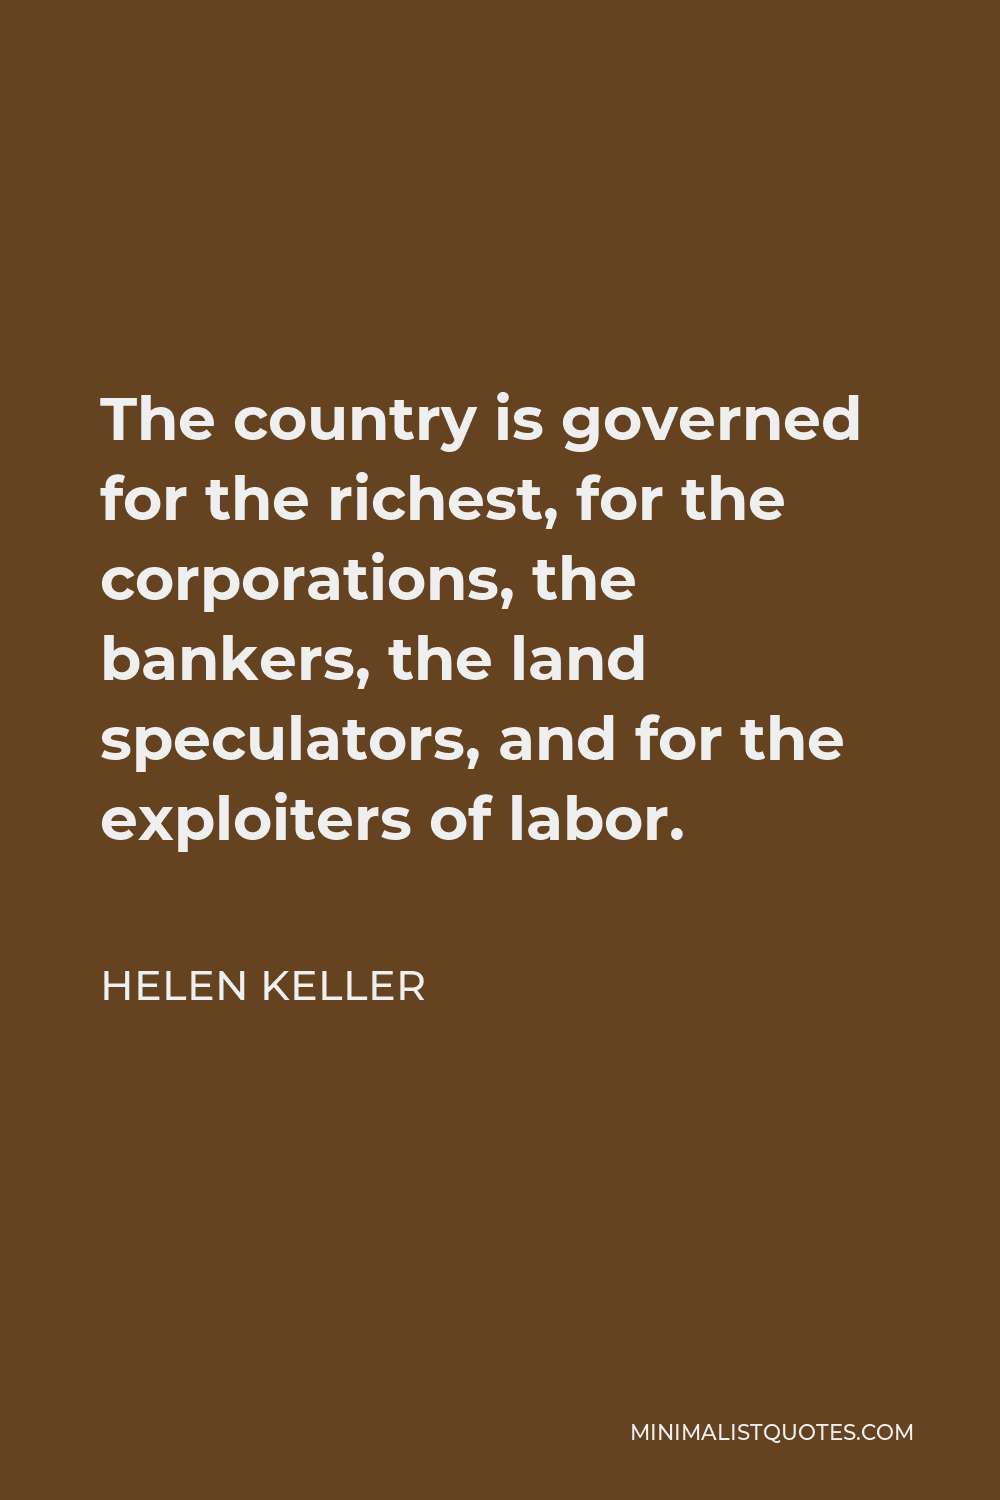 Helen Keller Quote - The country is governed for the richest, for the corporations, the bankers, the land speculators, and for the exploiters of labor.